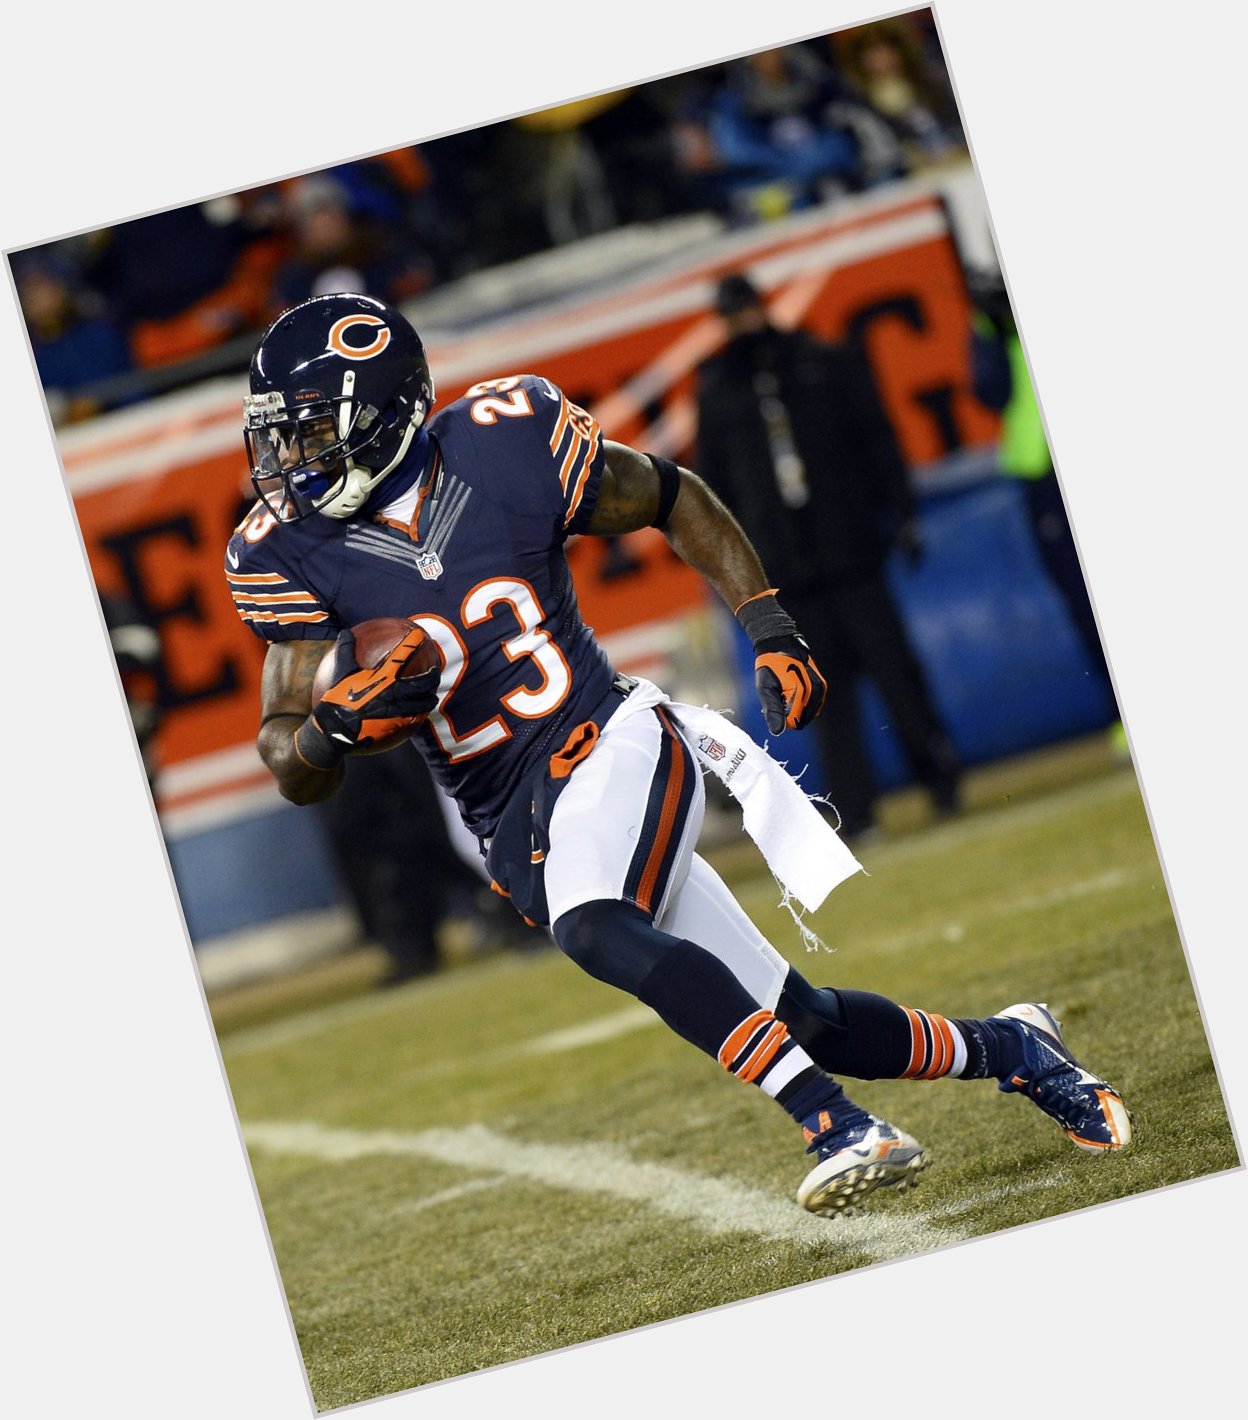 Happy Birthday to Devin Hester who turns 35 today! 